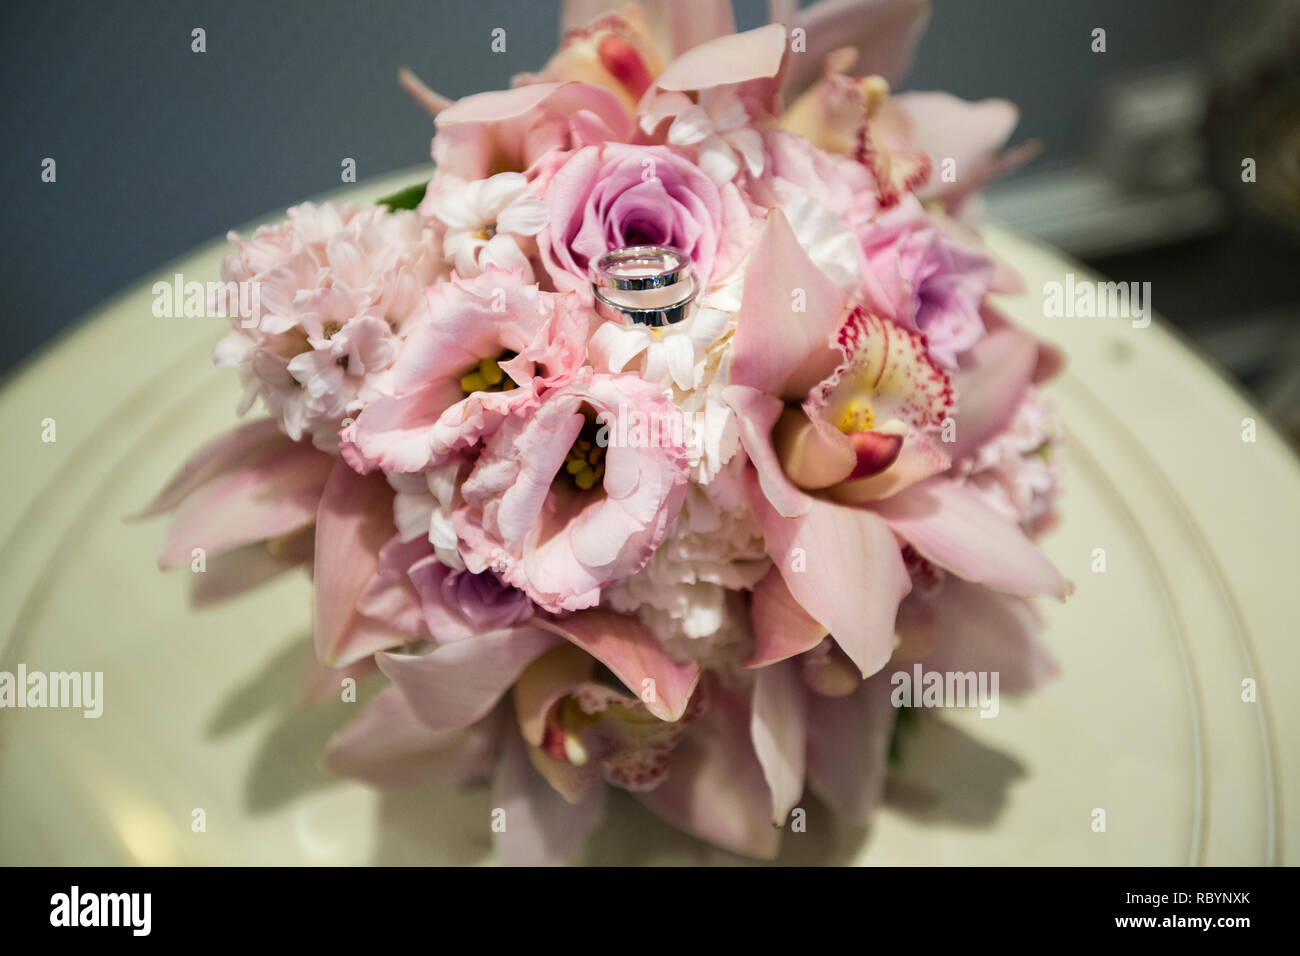 A pair of wedding gold rings on a bouquet of pink flowers, close up shot Stock Photo